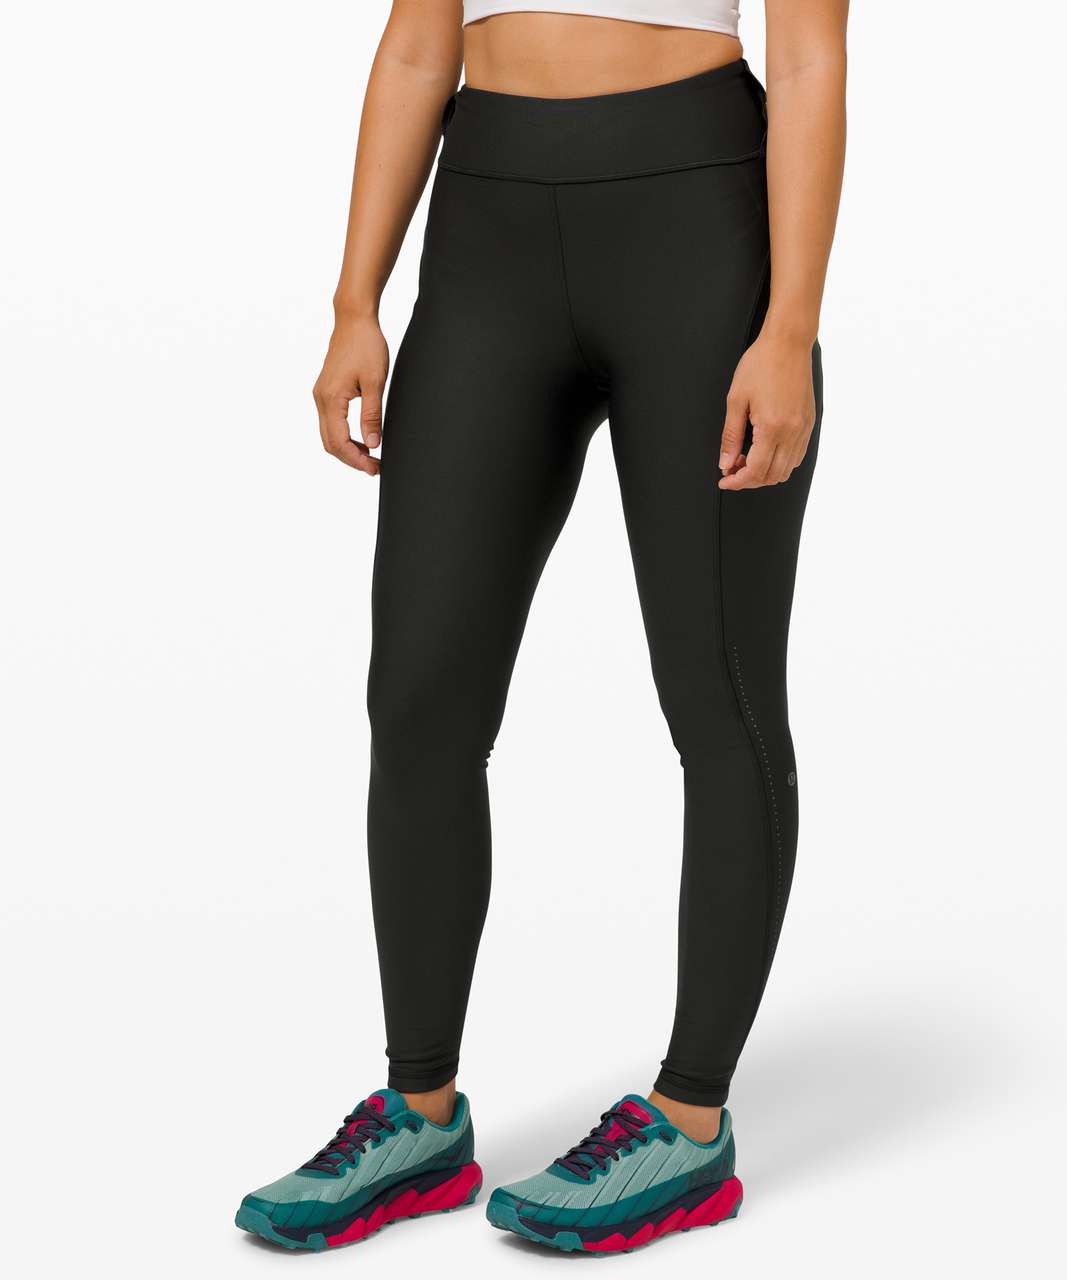 Lululemon Chase the Chill Super High-Rise Tight 28" - Black